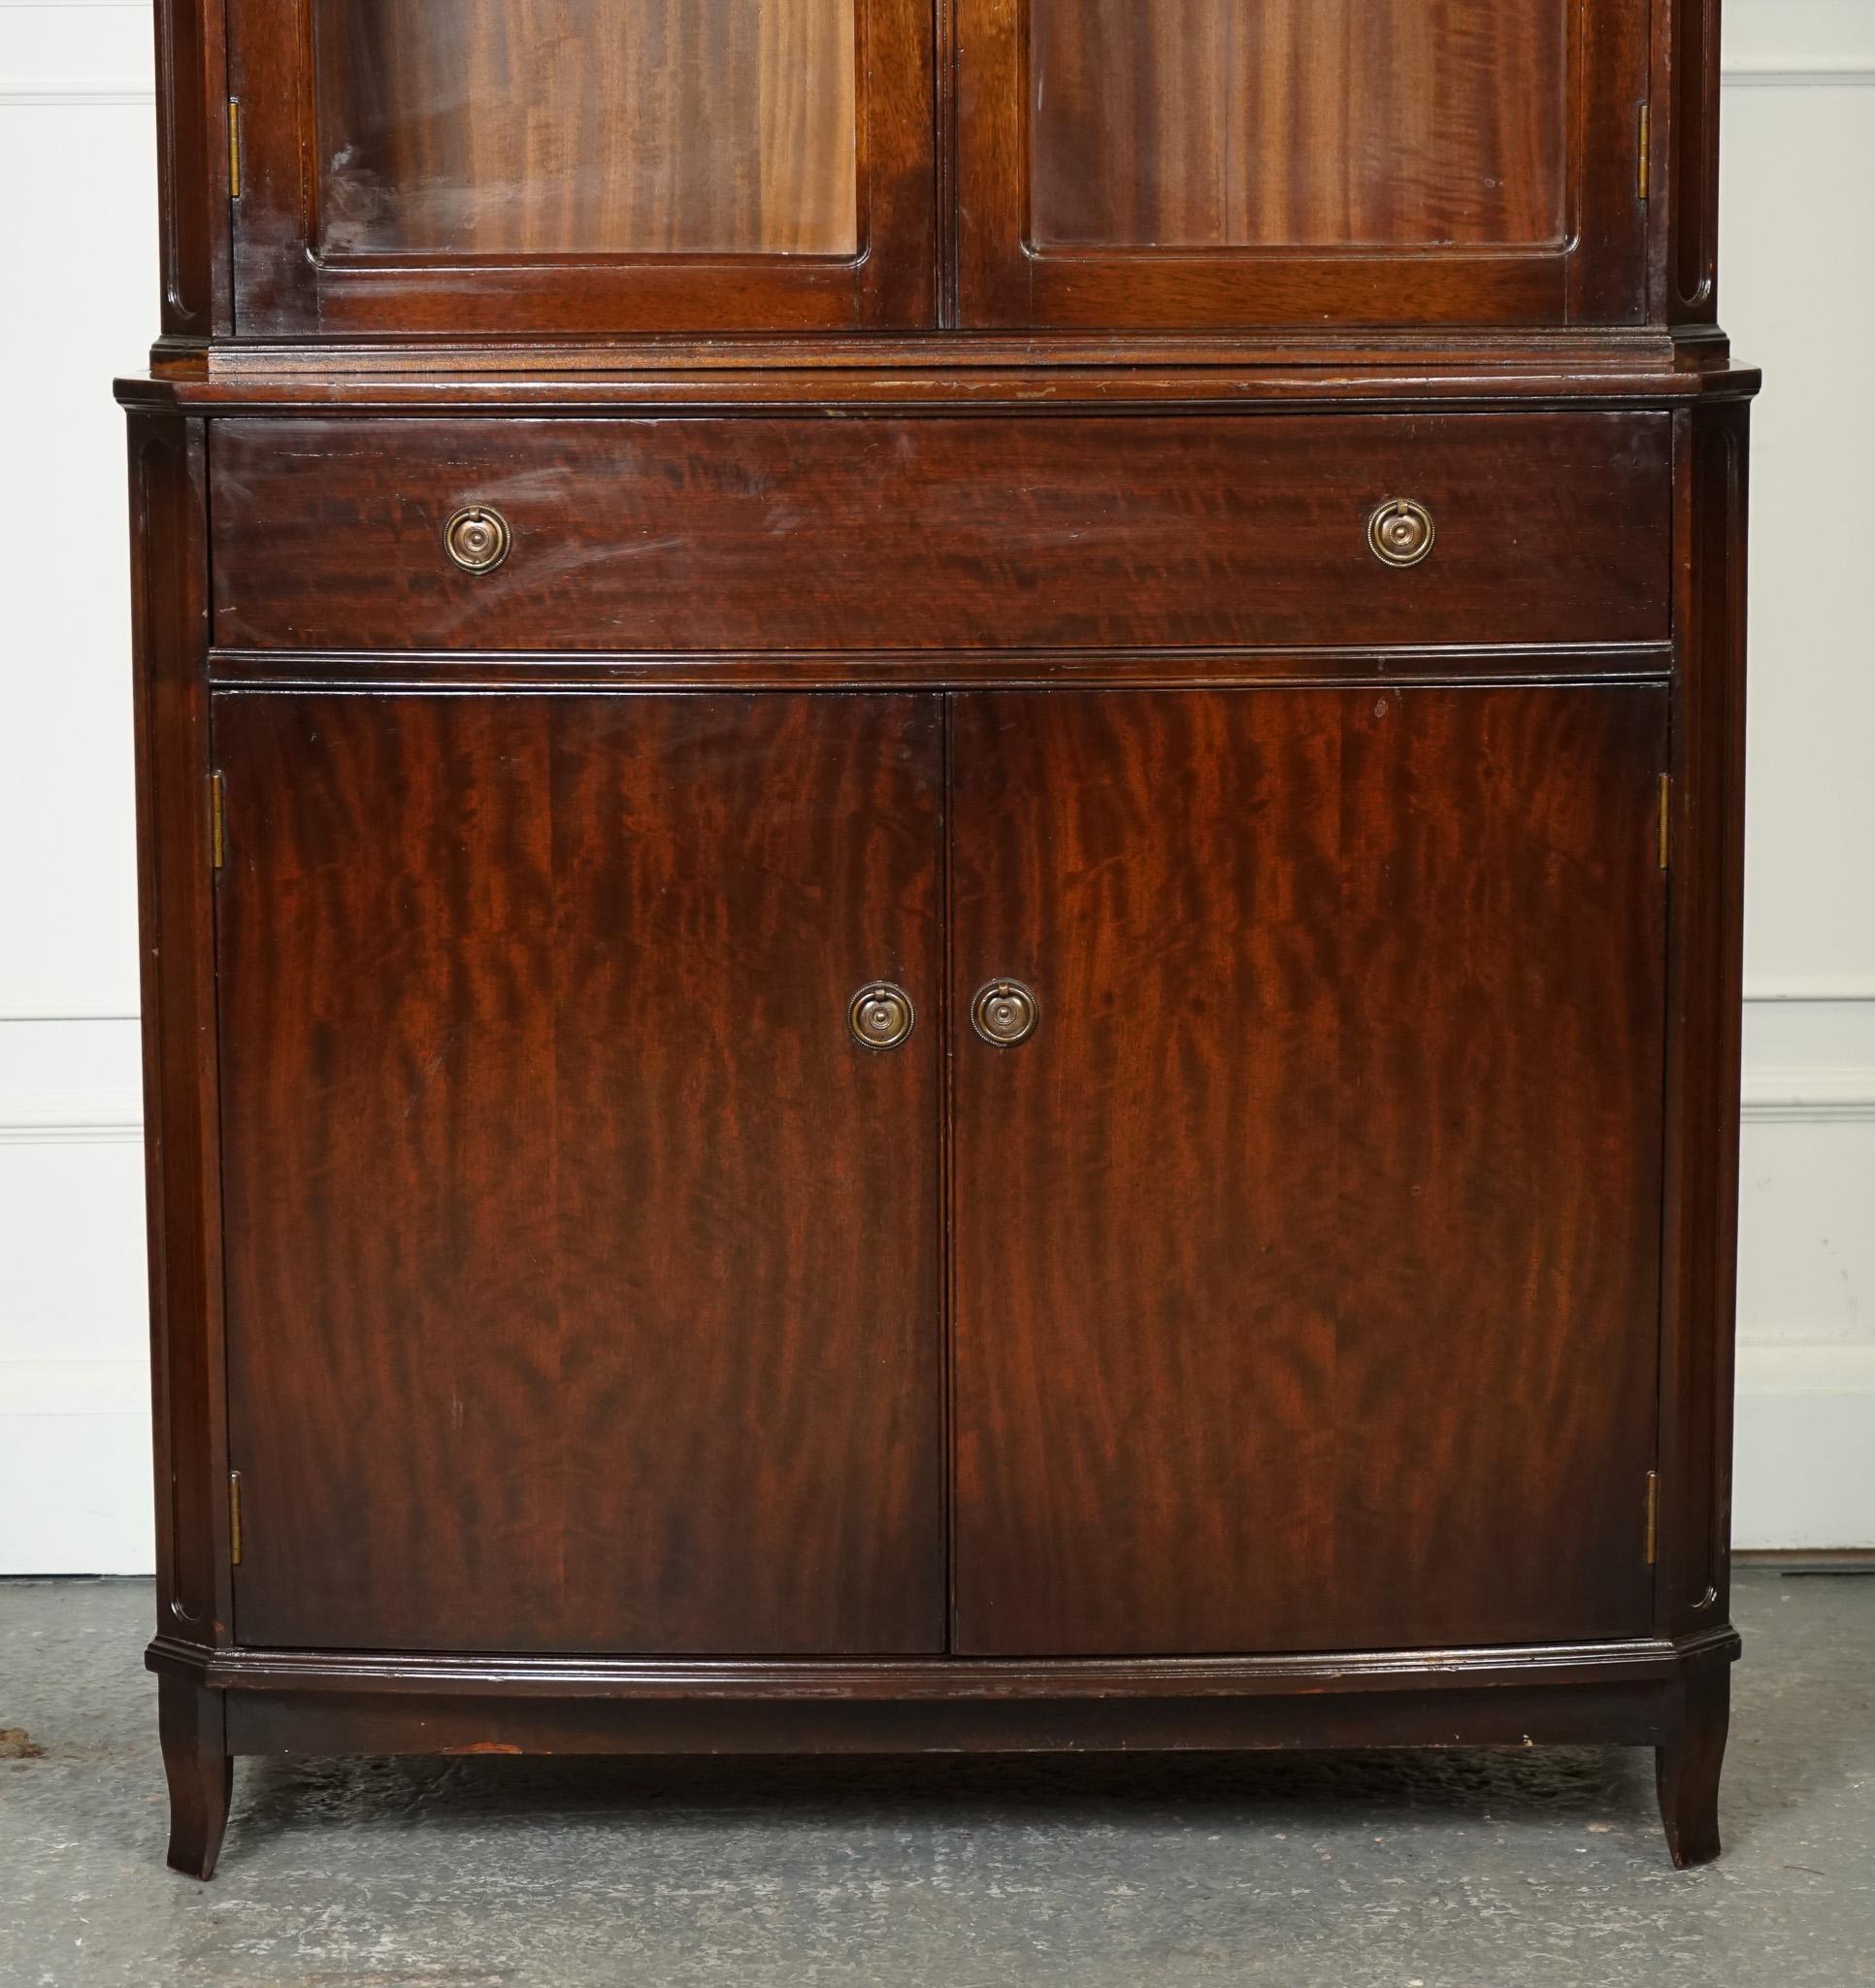 REGENCY STYLE HARDWOOD BOOKCASE CABINET GLAZED DOORS j1 In Good Condition For Sale In Pulborough, GB